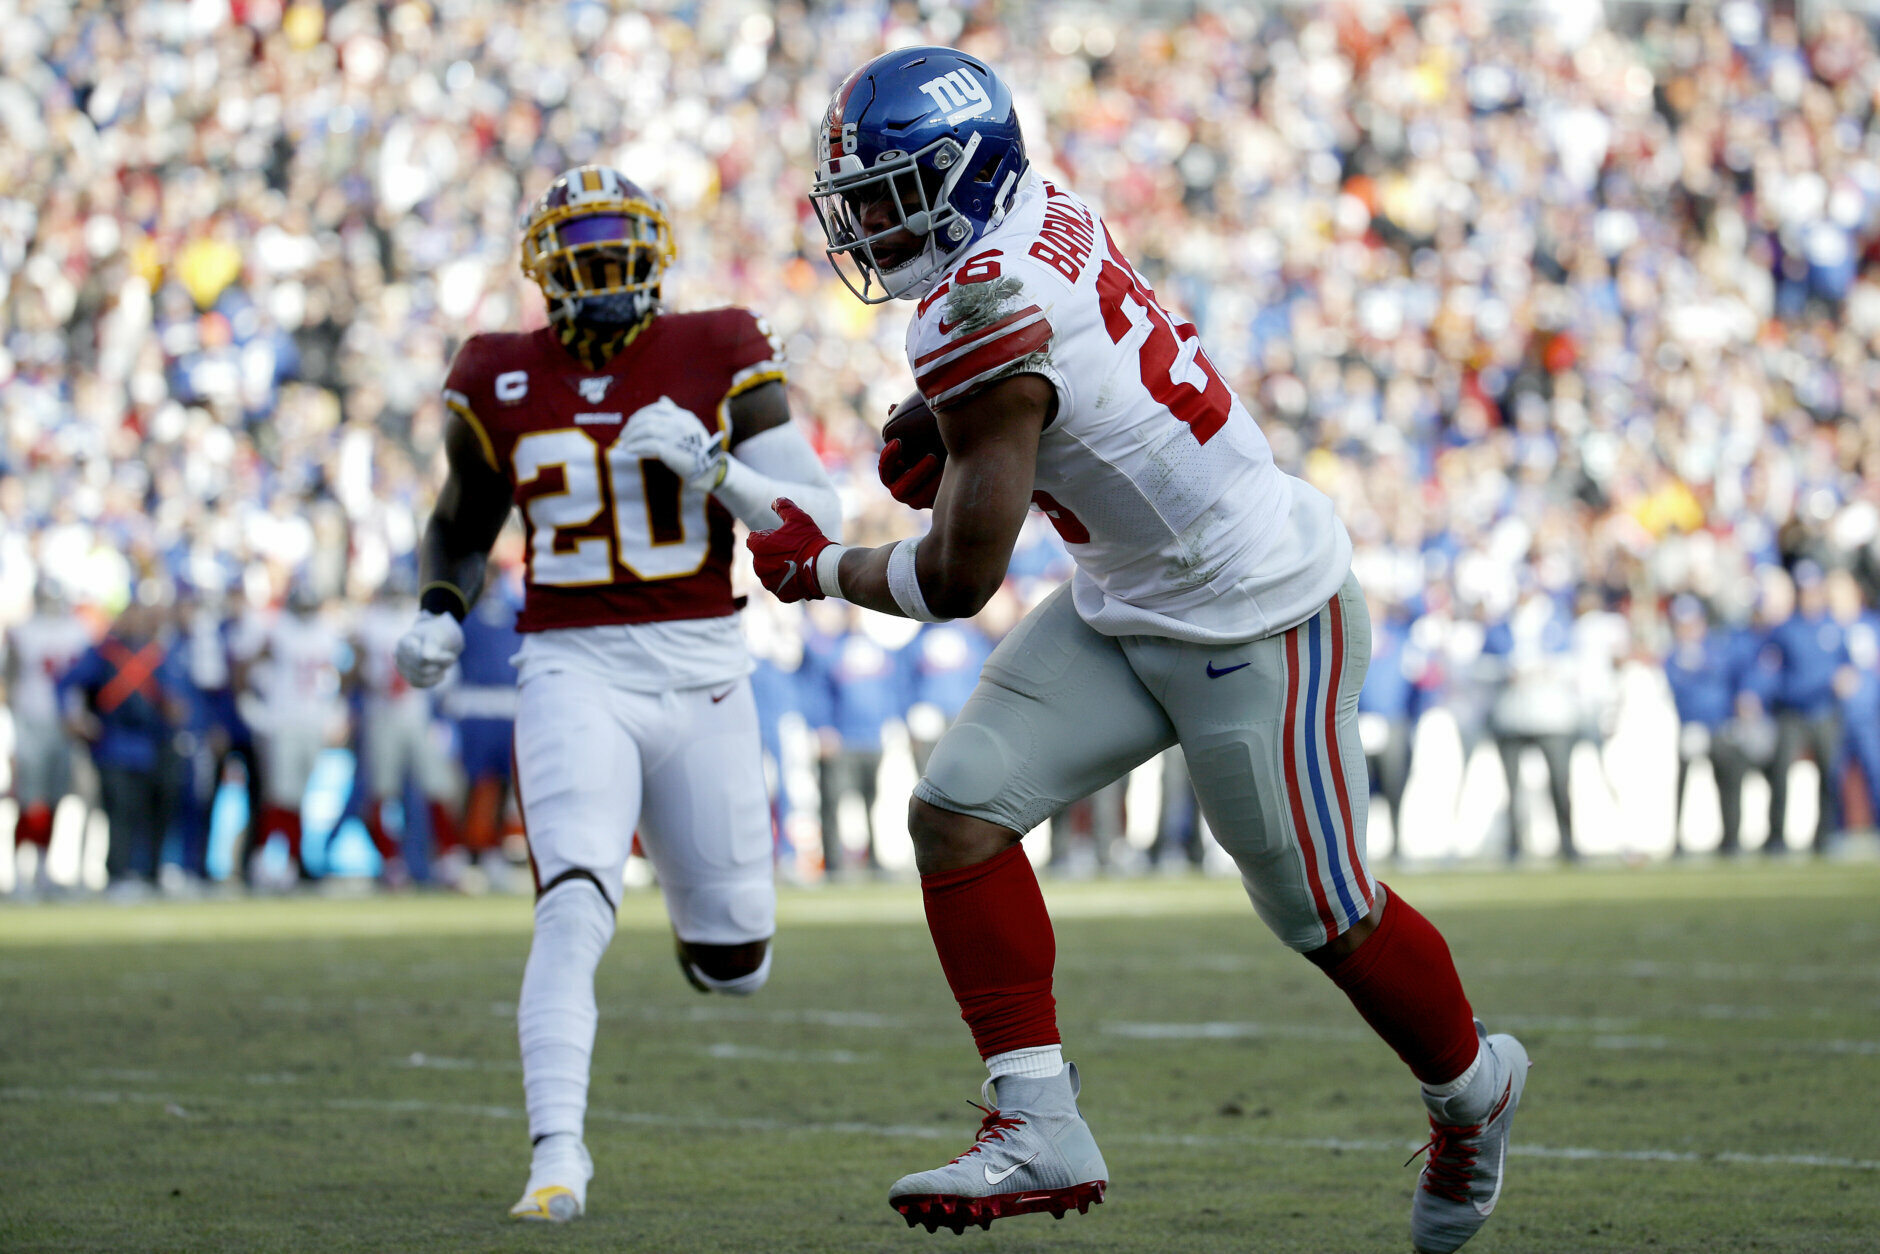 <p><b><i>Giants 41</i></b><br />
<b><i>Redskins 35 (OT)</i></b></p>
<p>The Redskins won (?) the battle for the second overall pick in 2020, and presumably, the right to get Hyattsville-native Chase Young in Burgundy and Gold. Yet, the Giants&#8217; future seemed brighter, with Daniel Jones becoming the first rookie to throw for 350 yards, 5 TDs and no picks and Saquon Barkley churning up 279 total yards. If the first Giants game had <a href="https://profootballtalk.nbcsports.com/2019/12/19/dwayne-haskins-gets-ill-thinking-about-first-game/" target="_blank" rel="noopener">Dwayne Haskins sick</a>, it figures to be awhile before this matchup soothes his stomach.</p>
